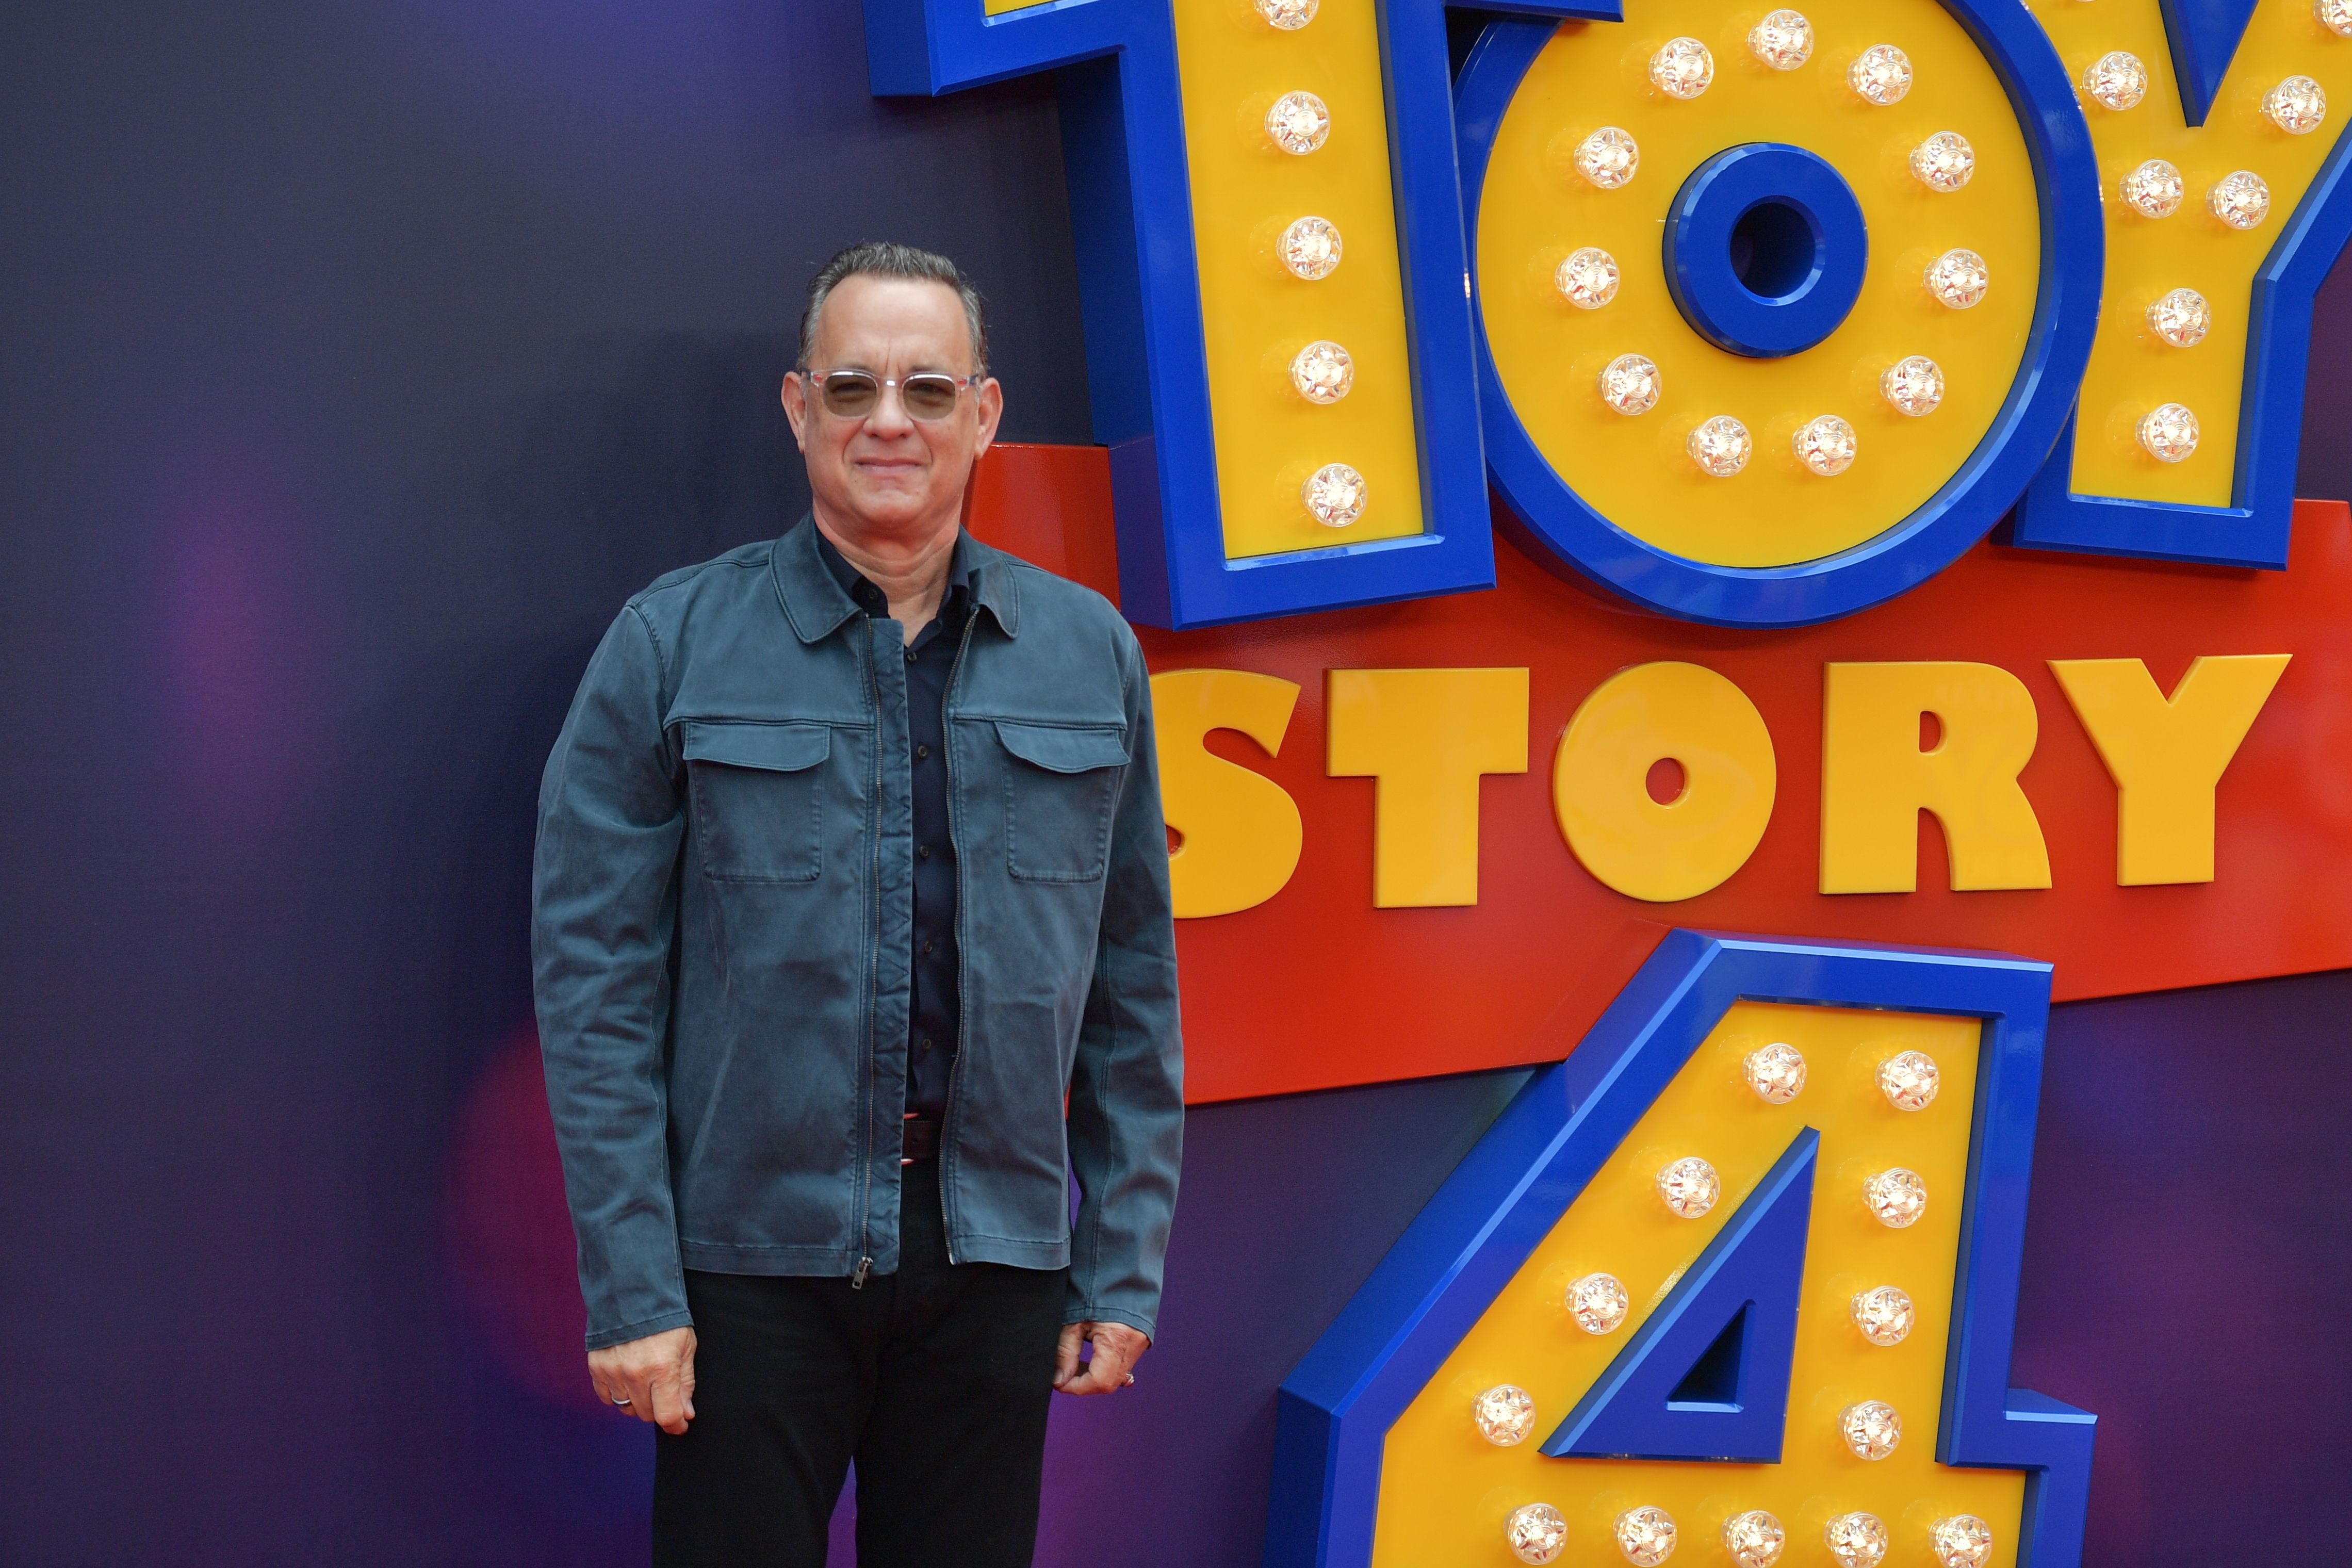 Tom Hanks Felt a ‘Lack of Purpose’ After Conclusion of ‘Toy Story’ — ‘It’s Like When Your Kids Leave the Home’